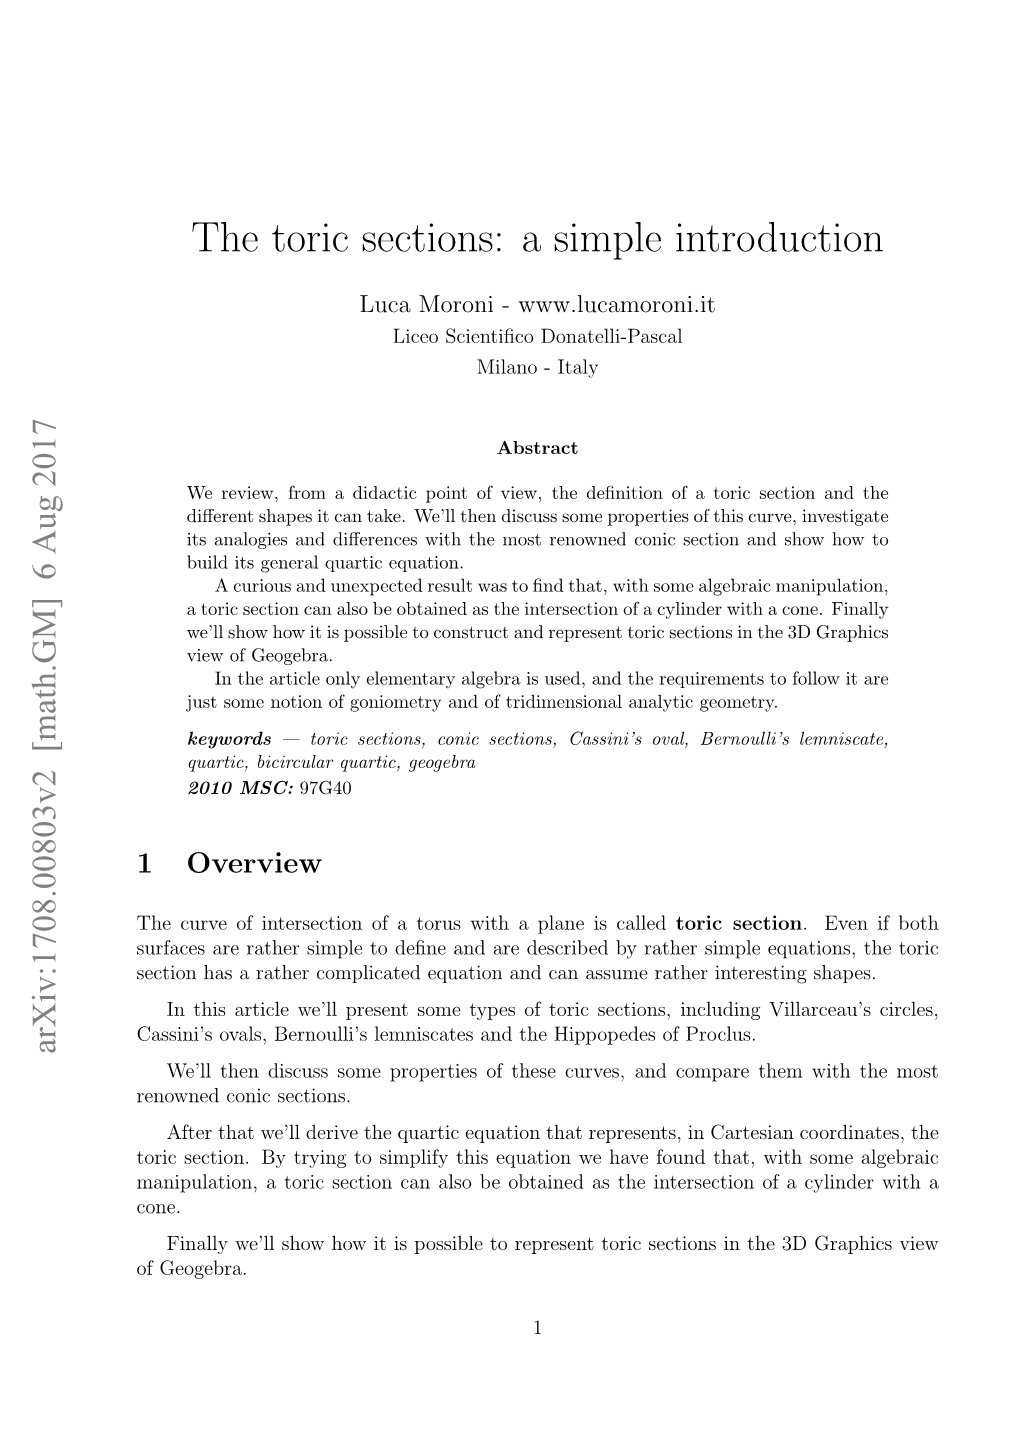 The Toric Sections: a Simple Introduction